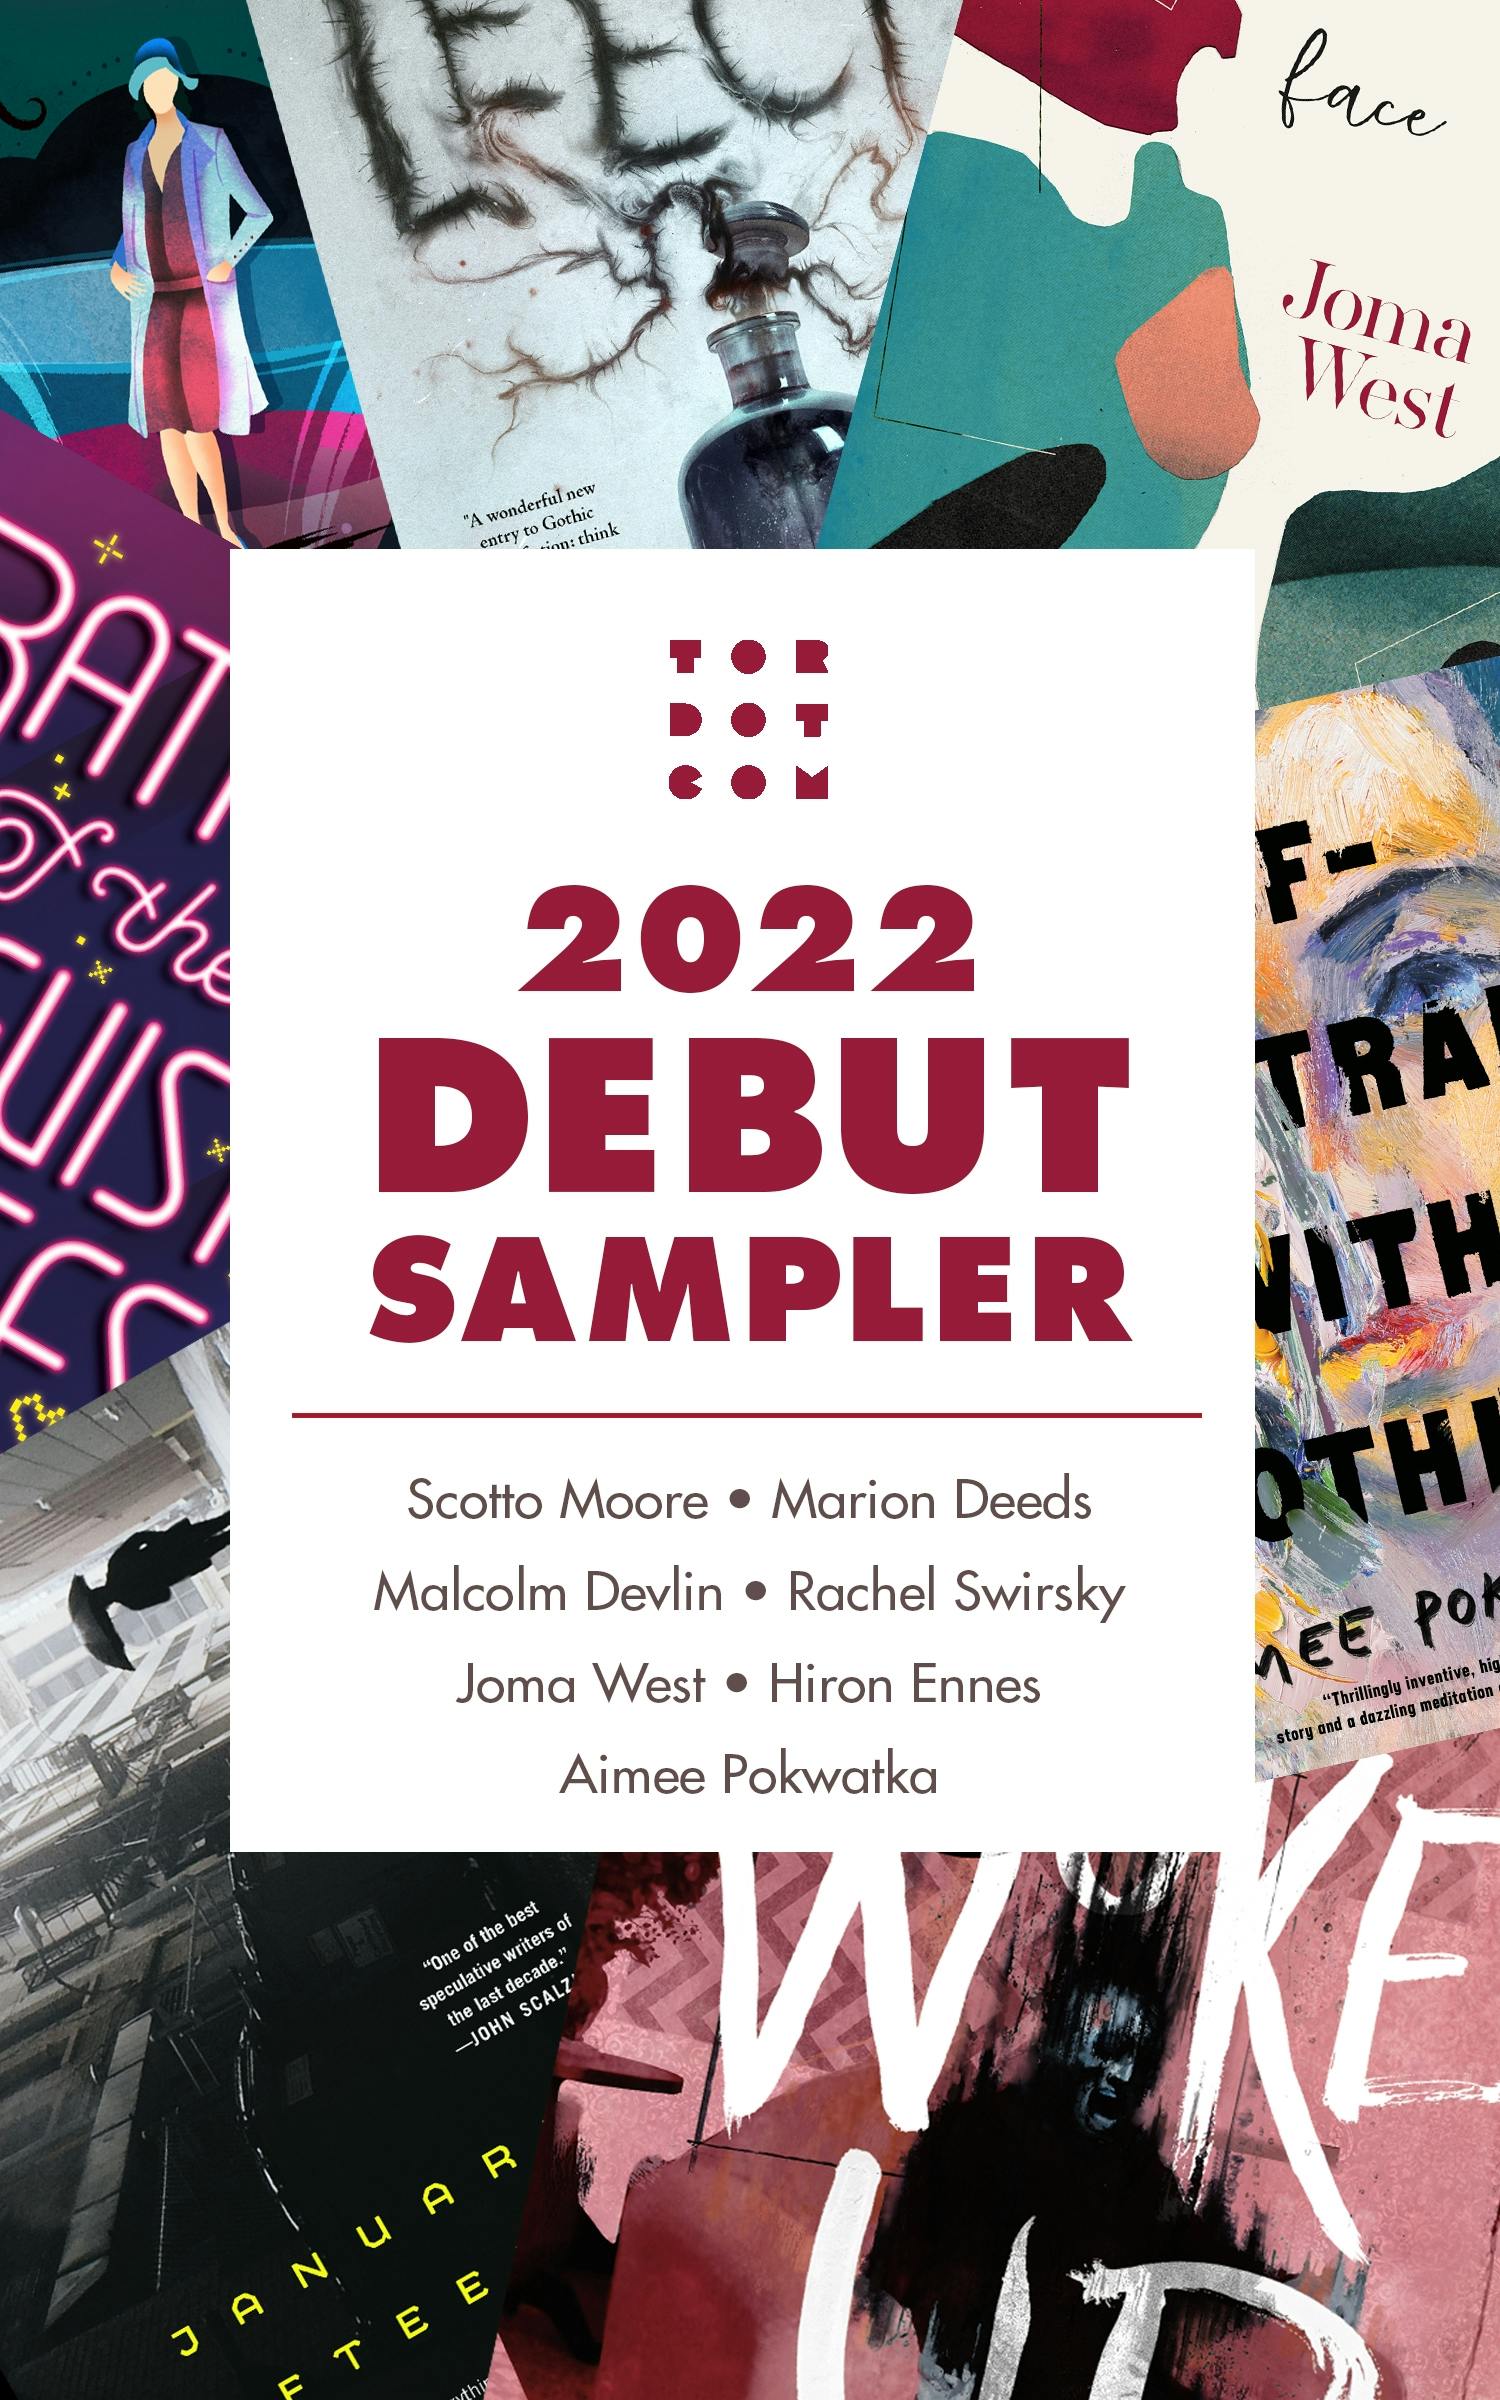 Cover for the book titled as: Tordotcom Publishing 2022 Debut Sampler